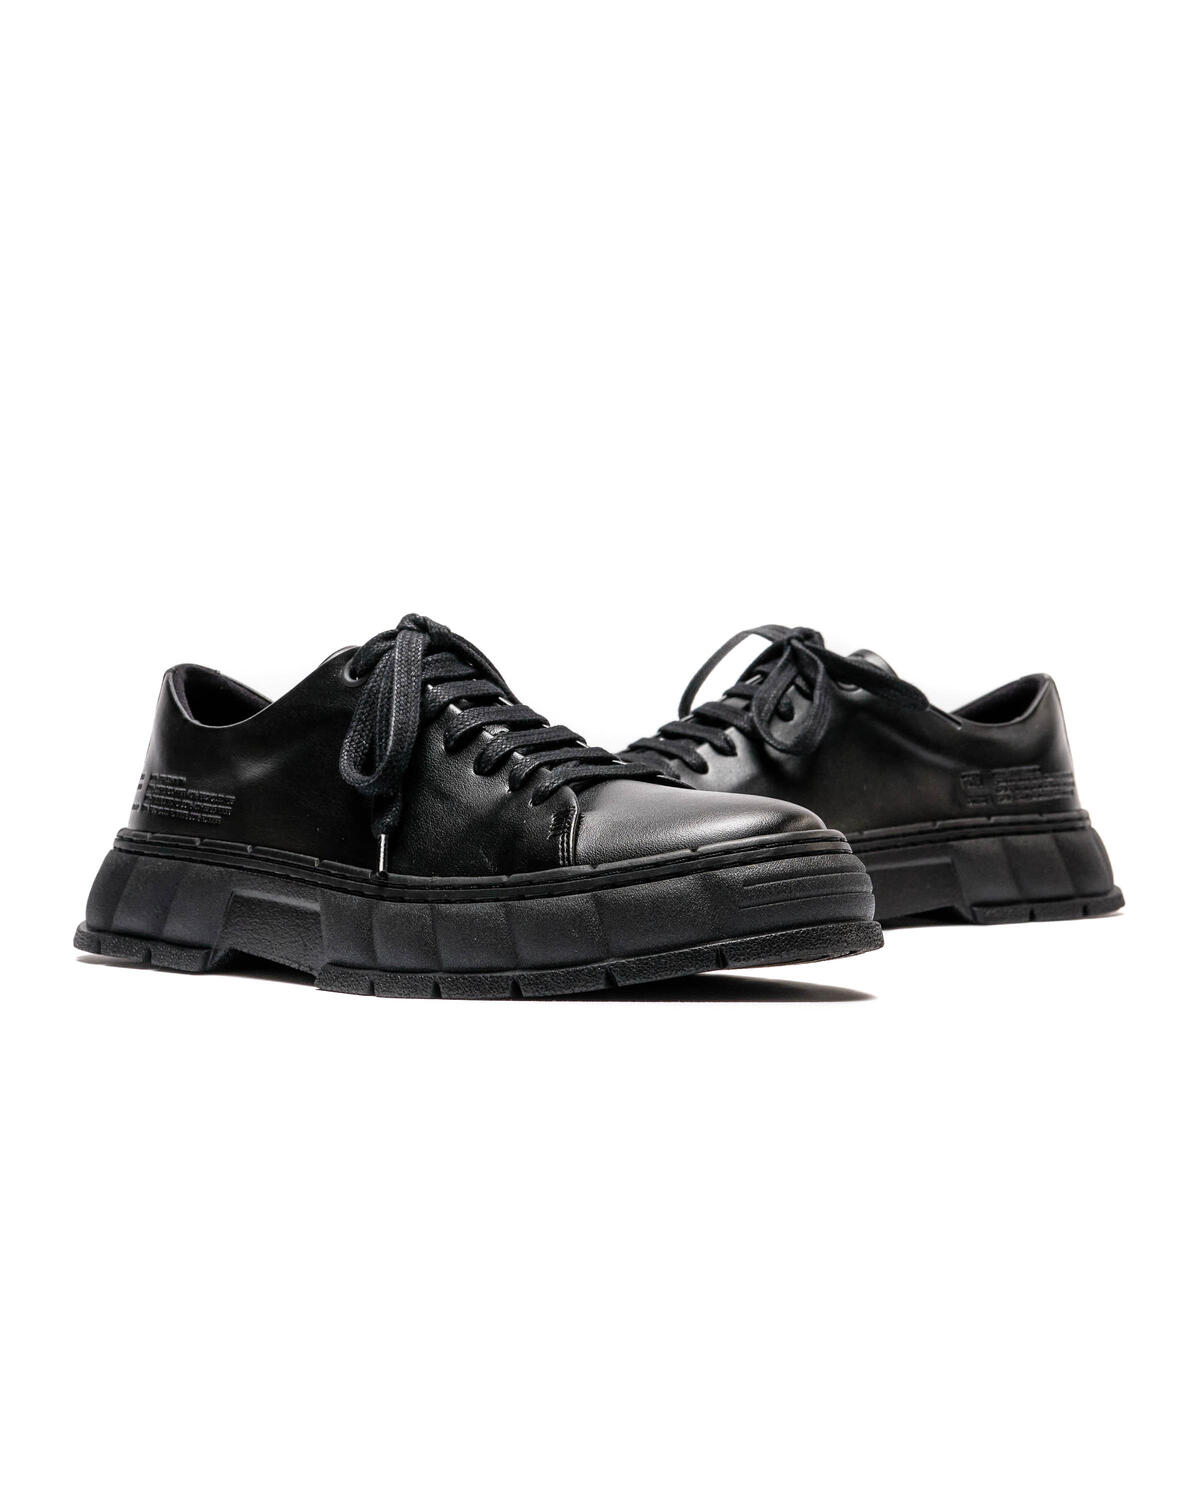 viron, Shoes, Viron Black Corn Leather 205 Sneakers